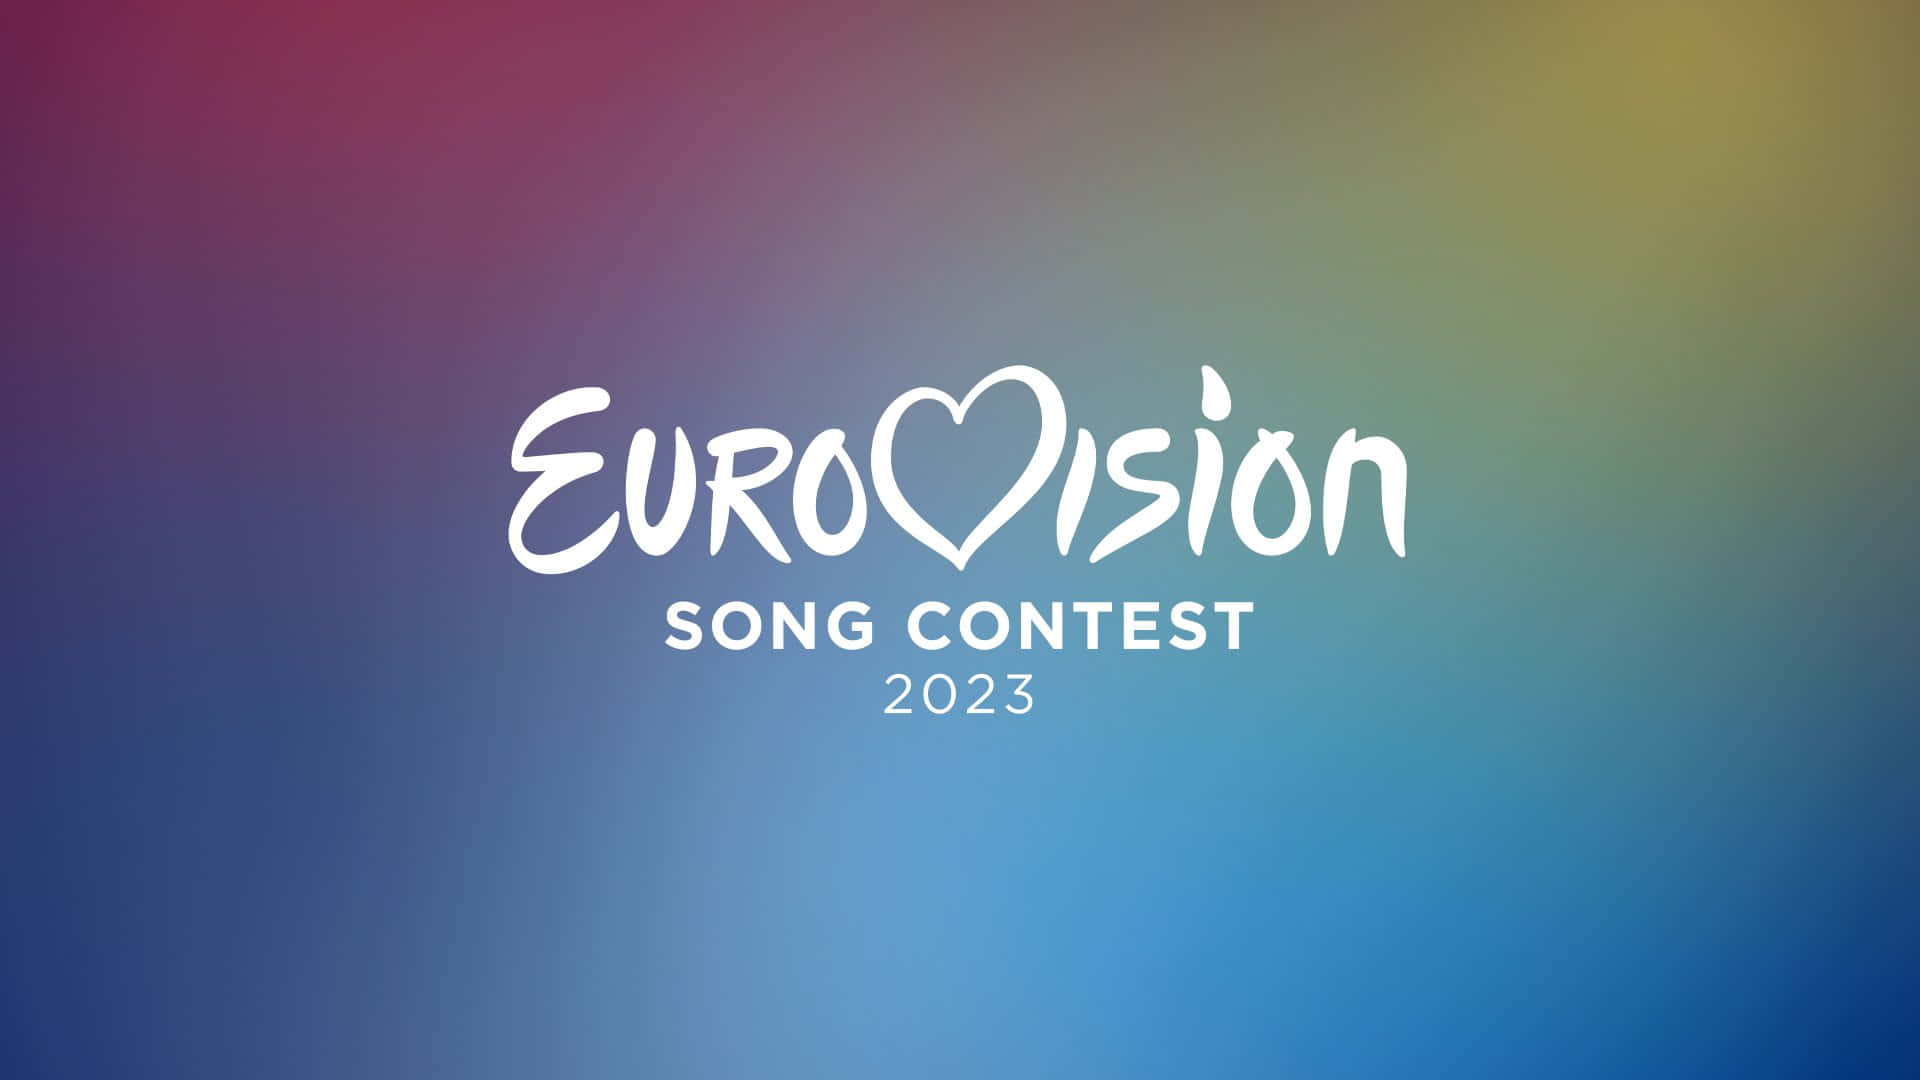 Eurovision Song Contest 2012 - A Colorful Background With The Words Eurovision Song Contest 2012 Wallpaper